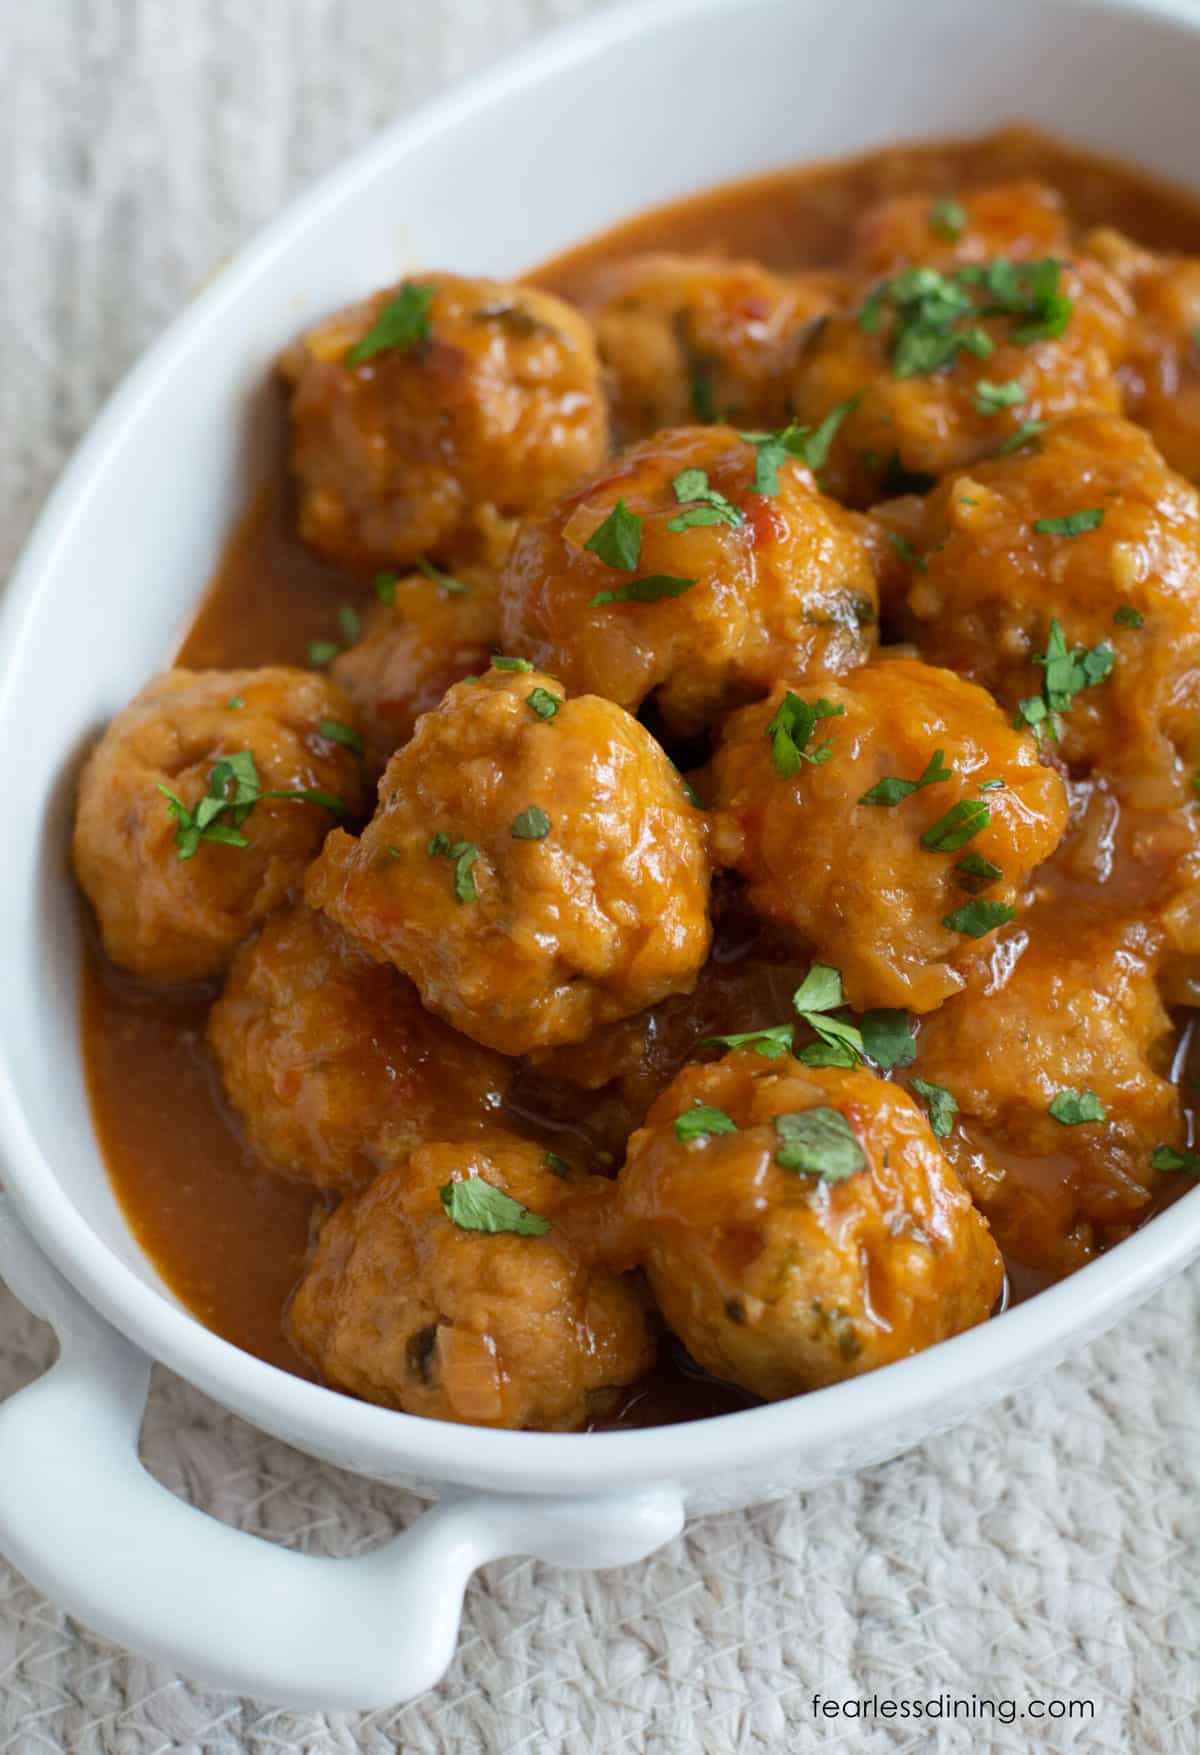 A close up of the sweet and sour meatballs in a white serving dish.